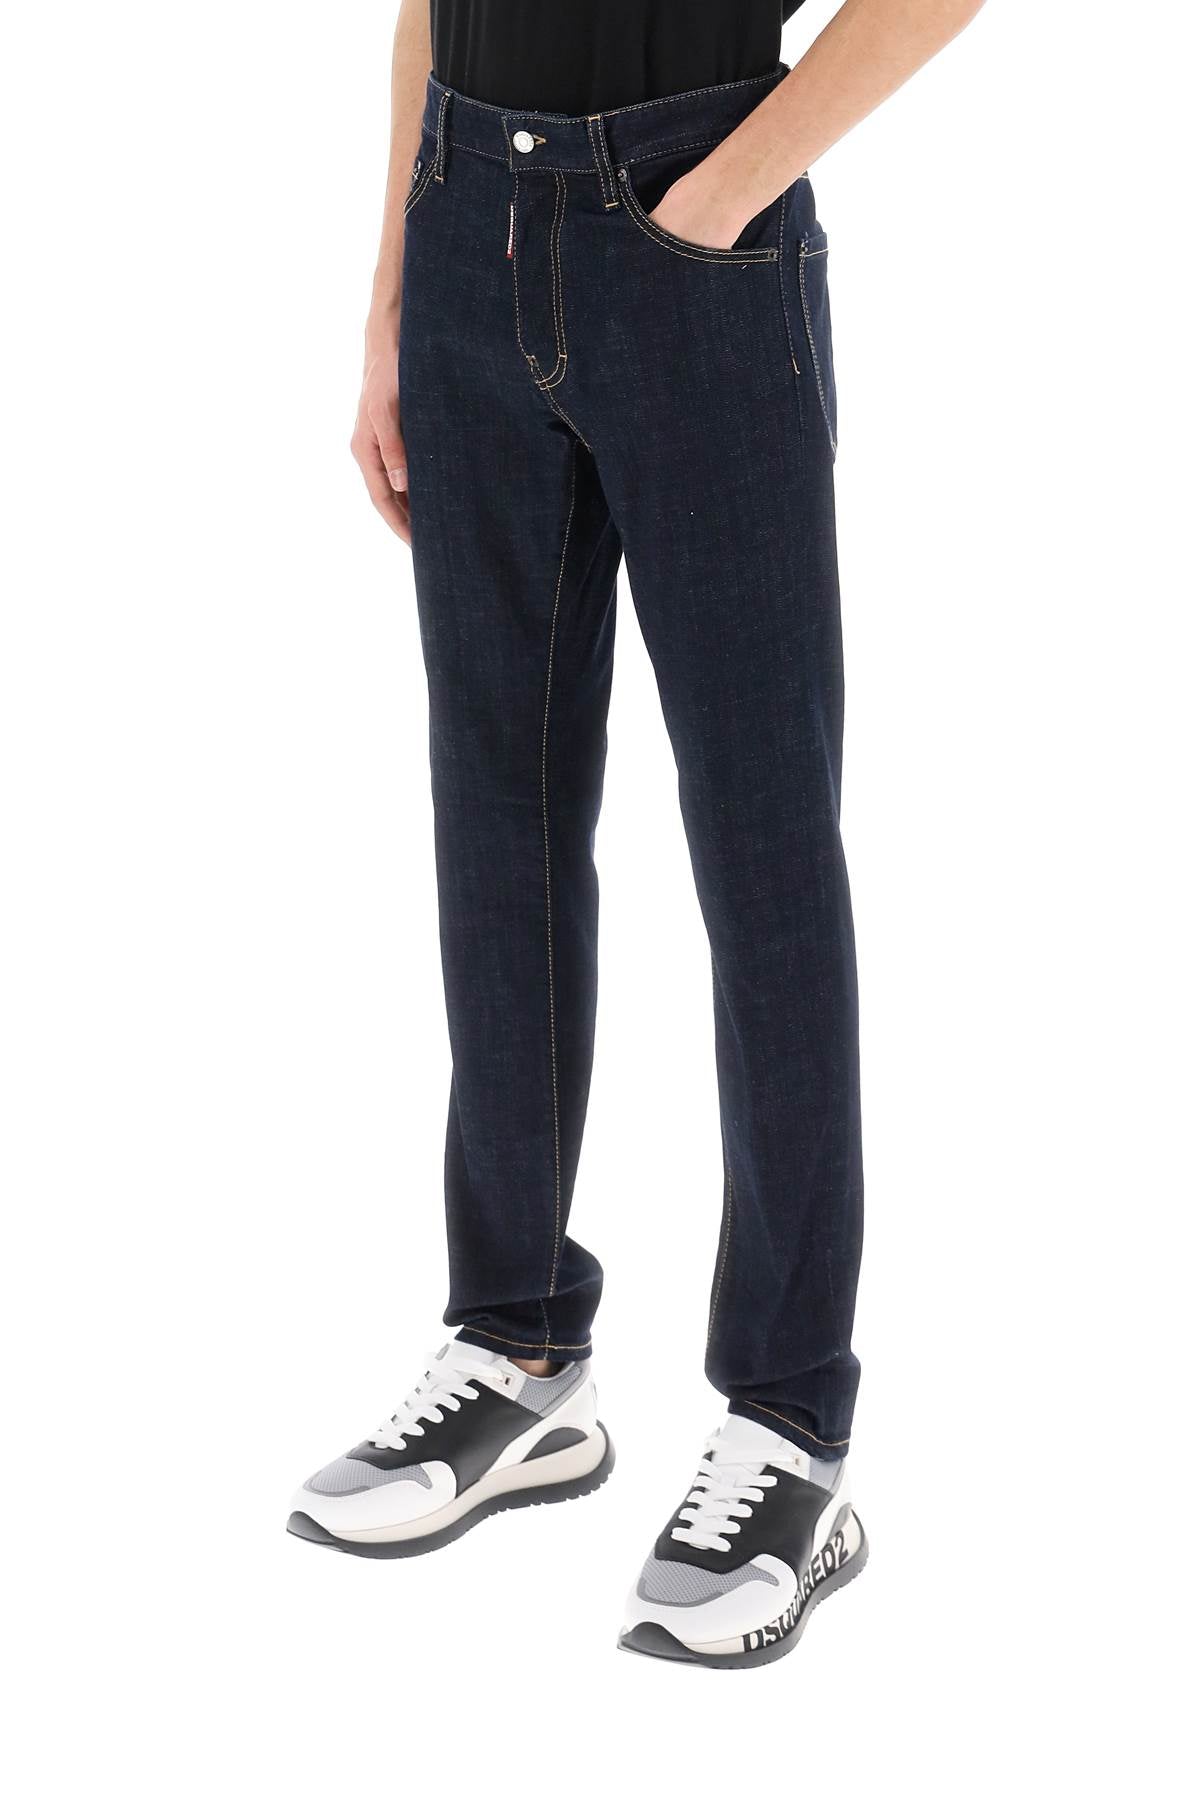 Dsquared2 Dsquared2 cool guy jeans in dark rinse wash